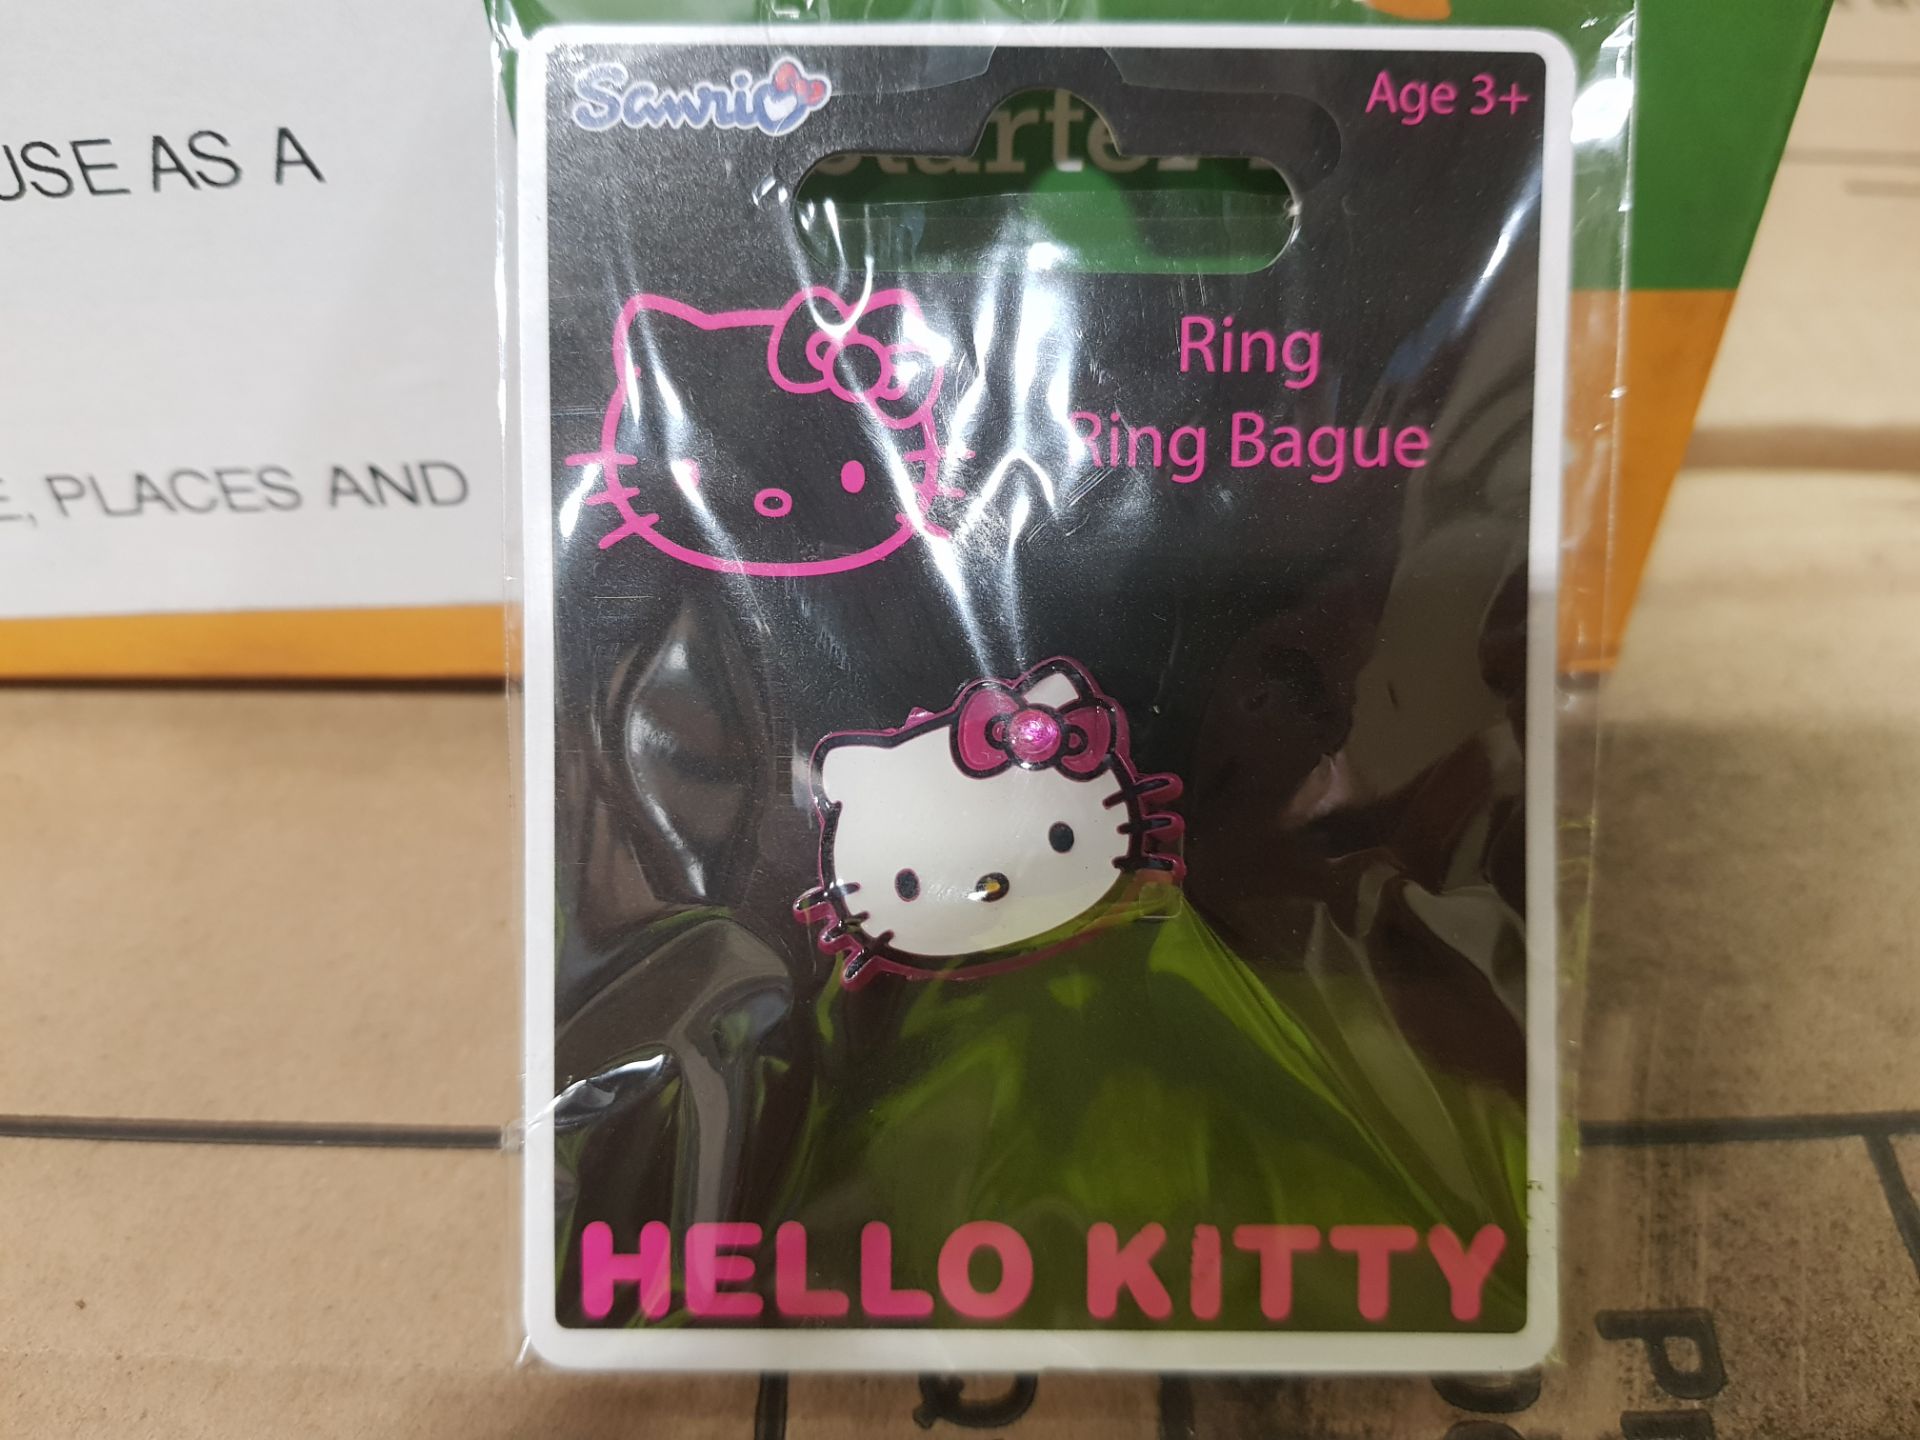 360 X HELLO KITTY CHILDRENS RING IN RETAIL PACK AGE 3+ IN 15 CARTONS